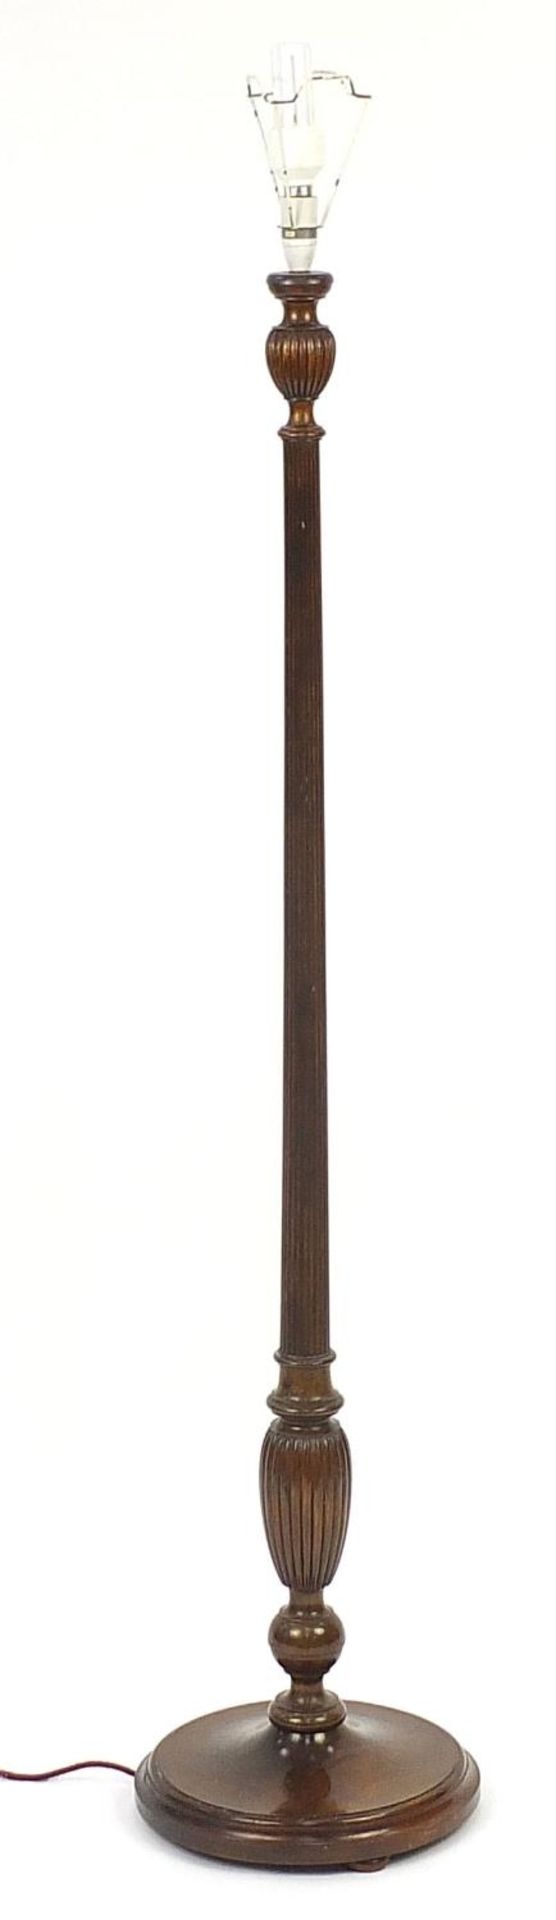 Good quality mahogany fluted standard lamp, 155cm high excluding the fitting :For Further